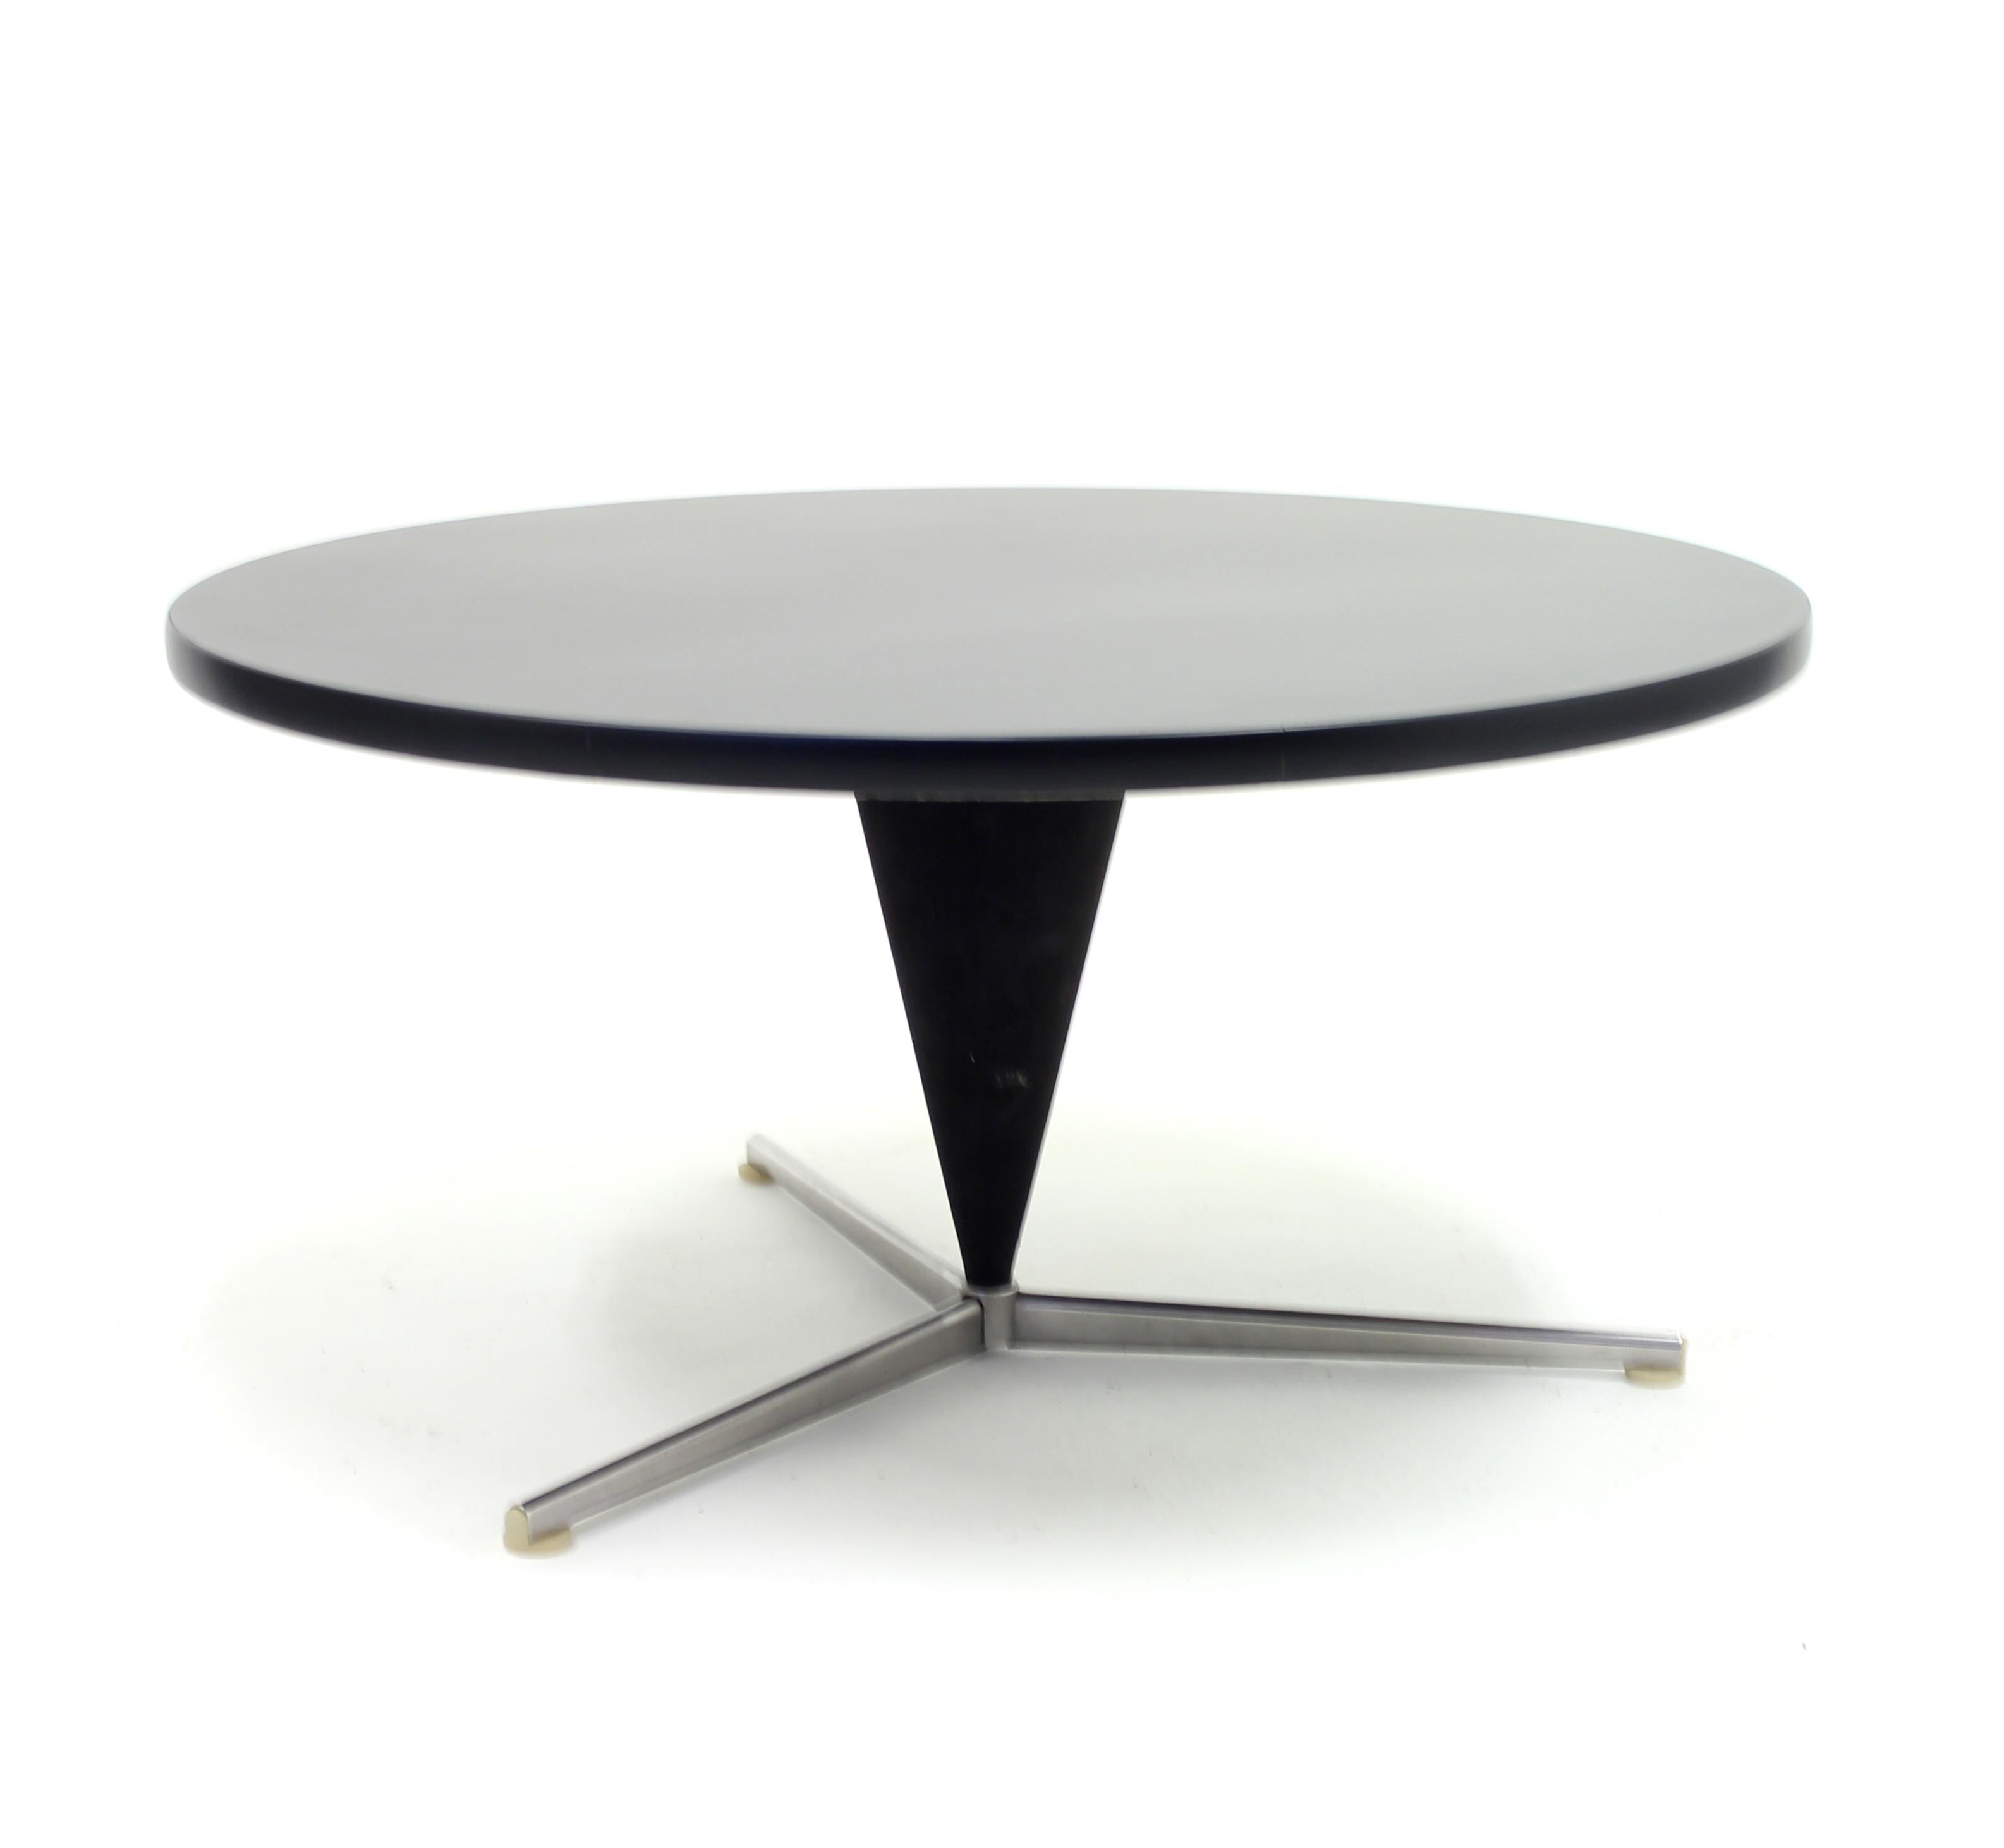 20th Century Early production Cone Table by Verner Panton for Plus-Linje, 1950s